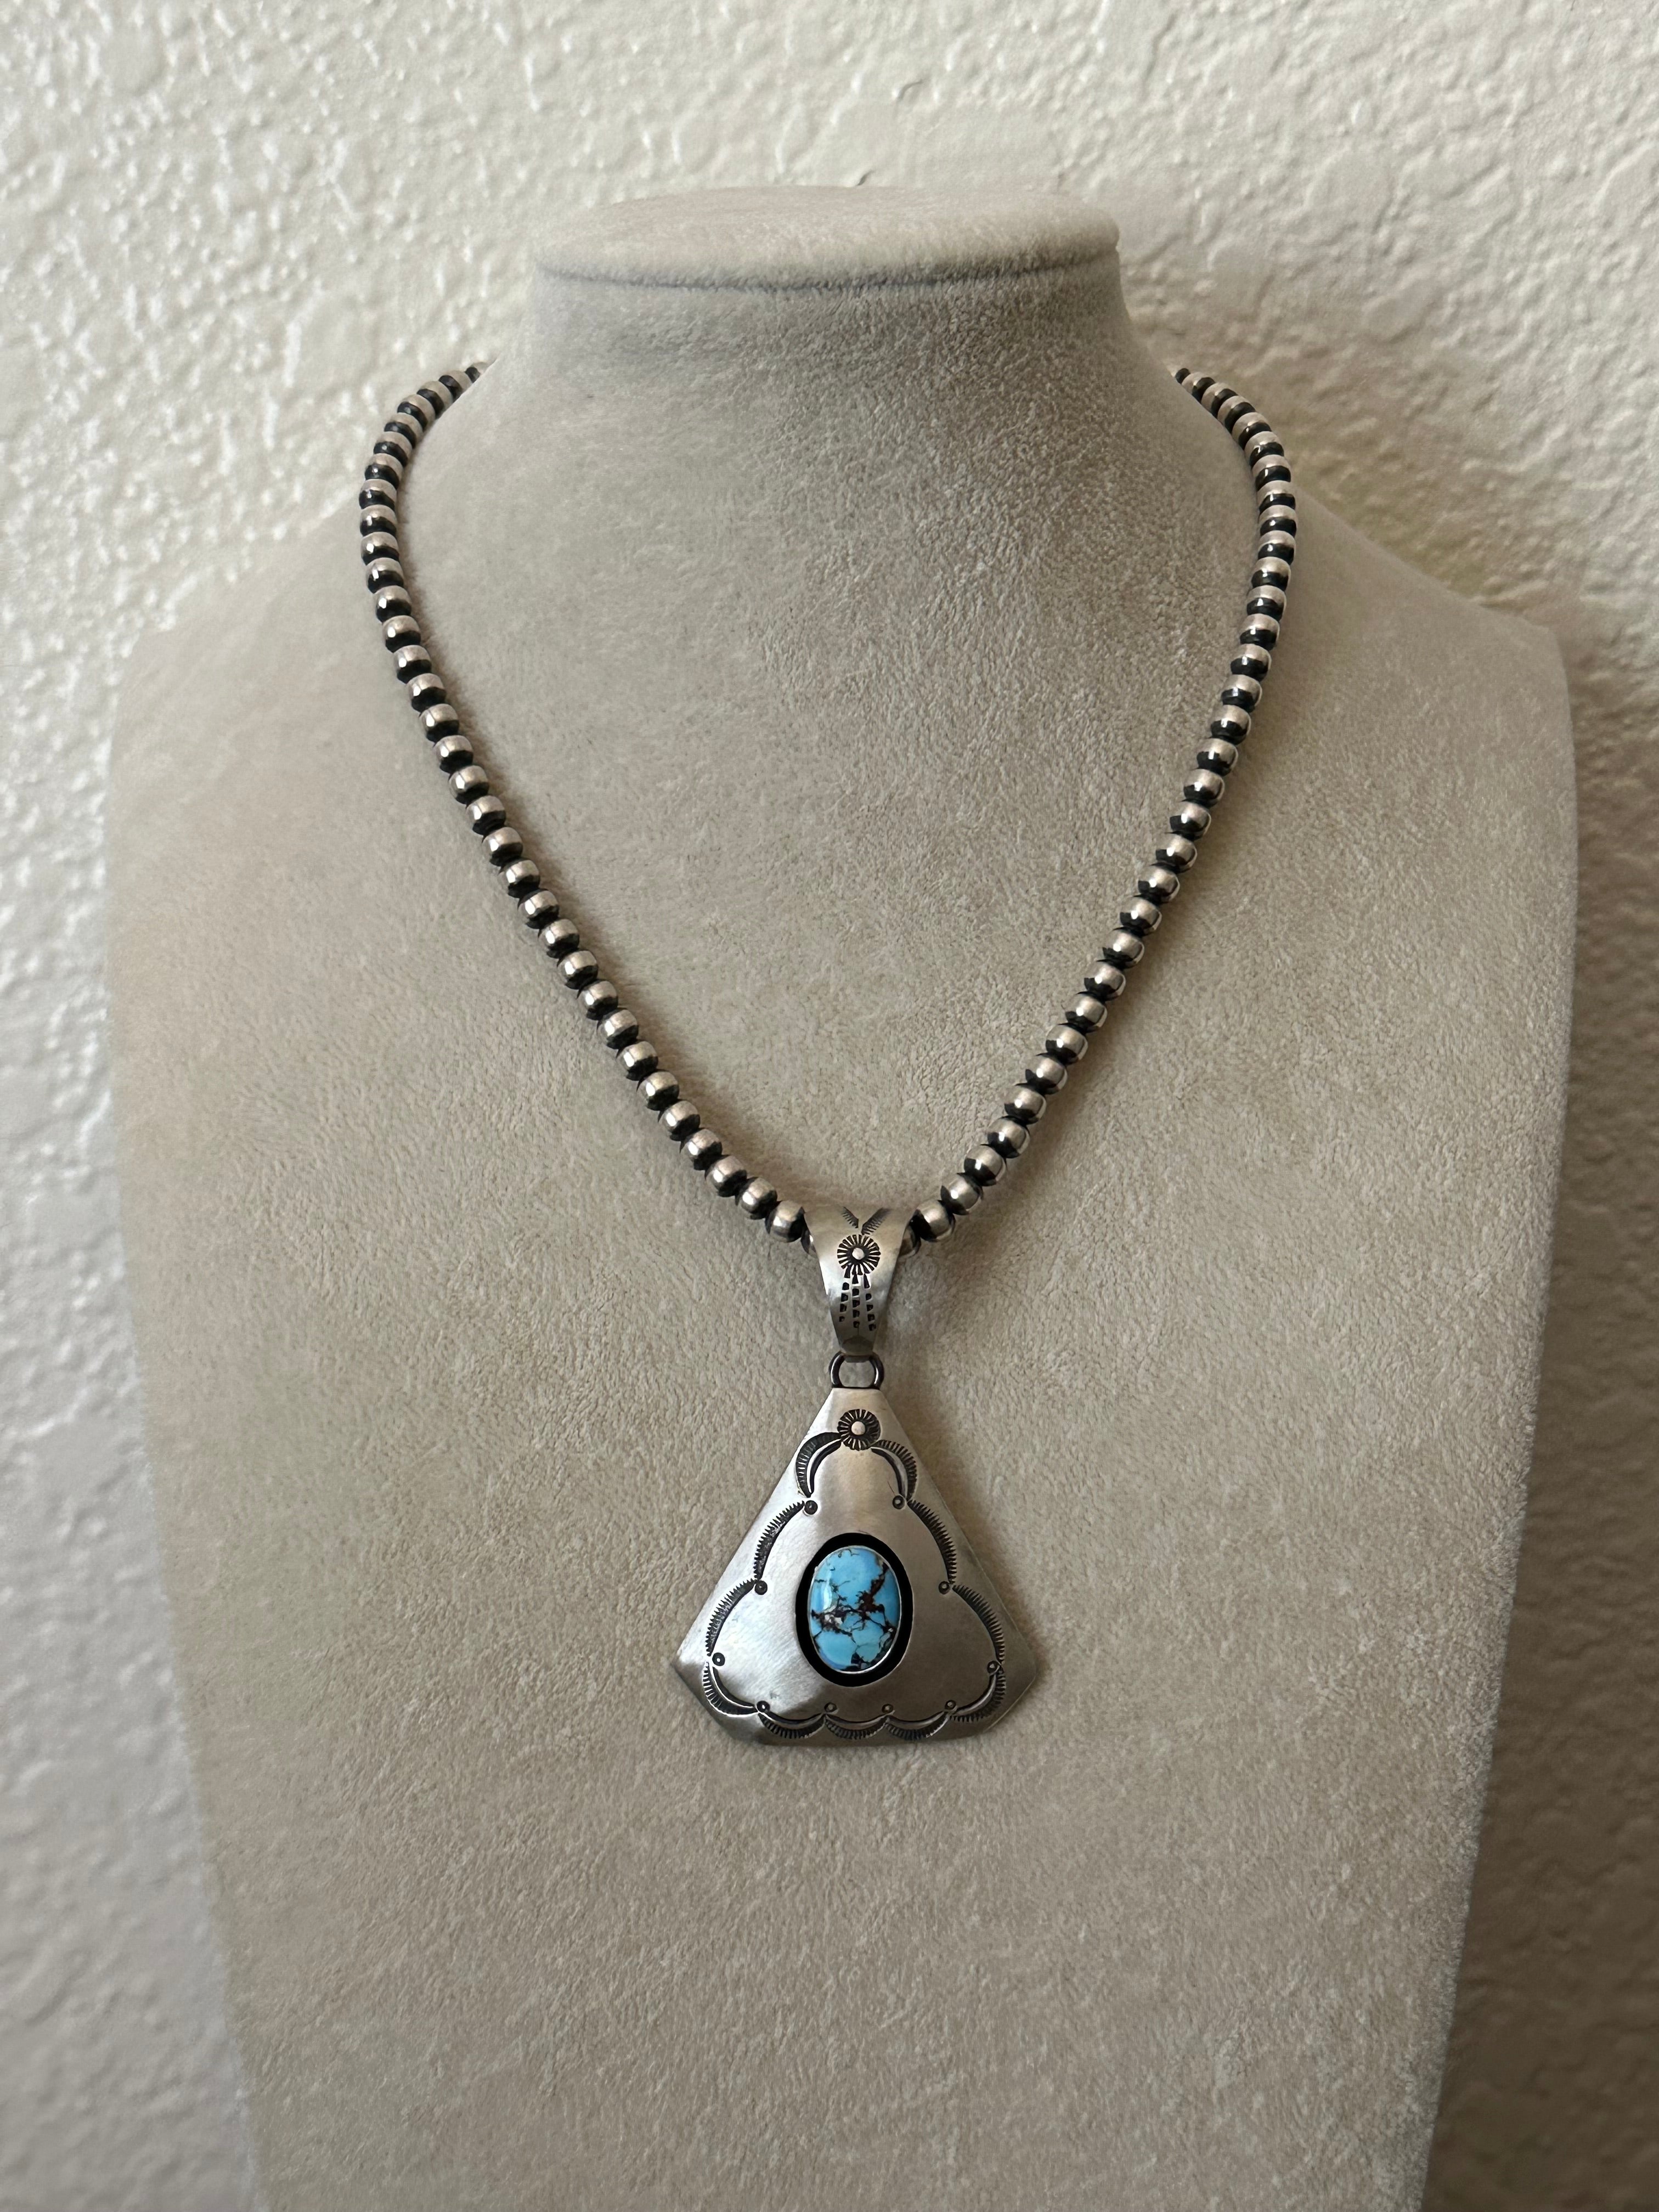 P Begay Golden Hills Turquoise & Sterling Silver Pendant